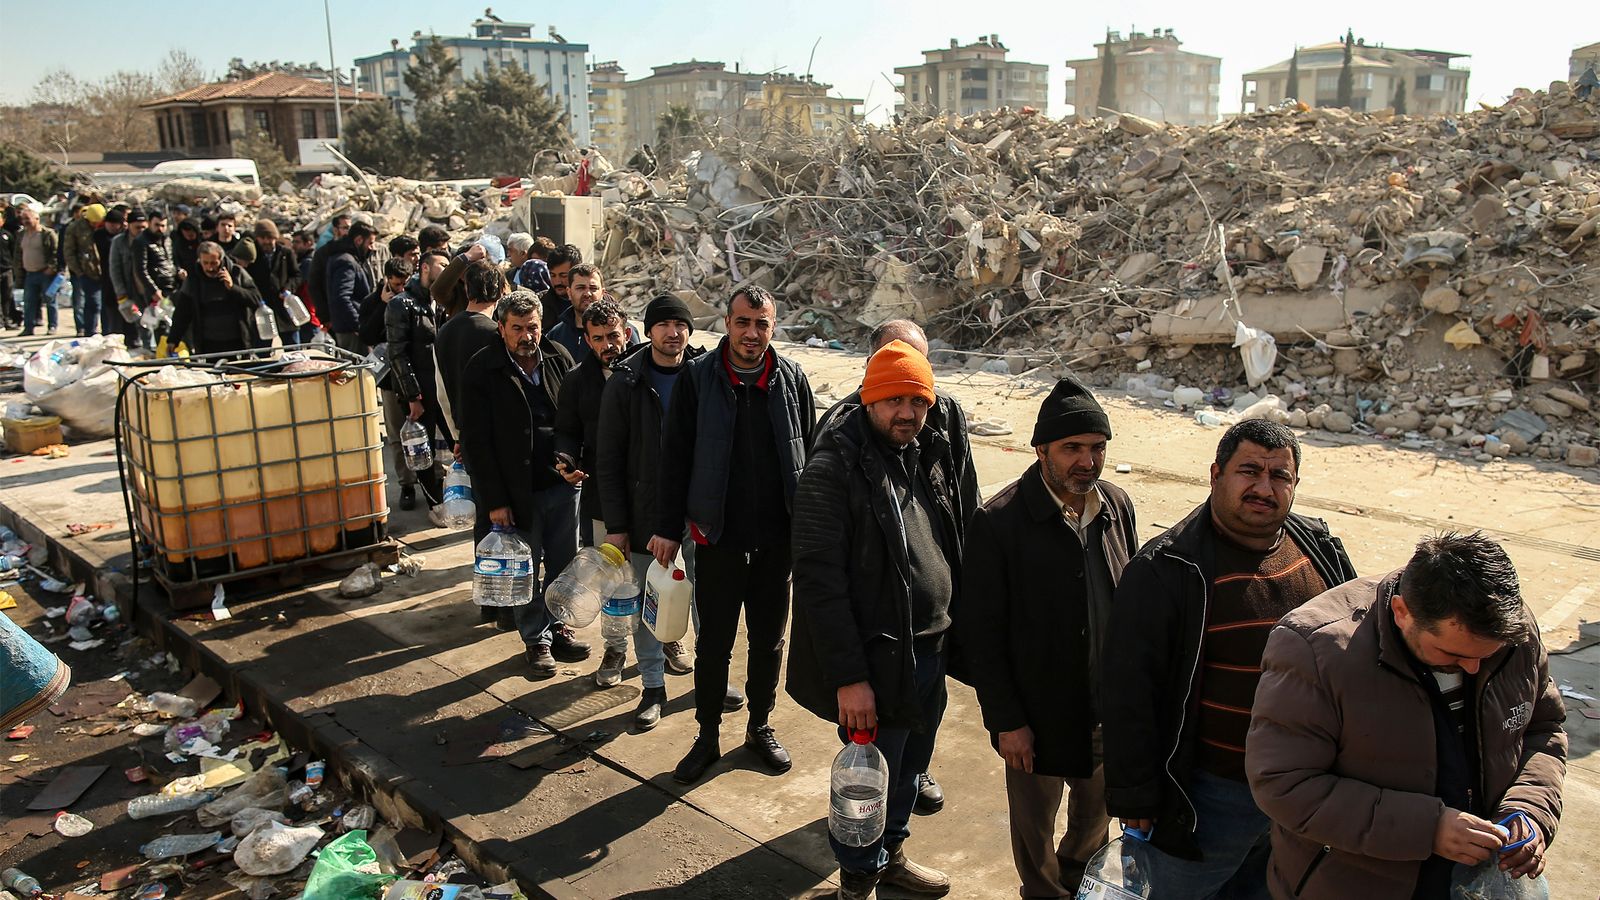 Two months after the earthquake disaster, the Turkish government continues to ignore public safety